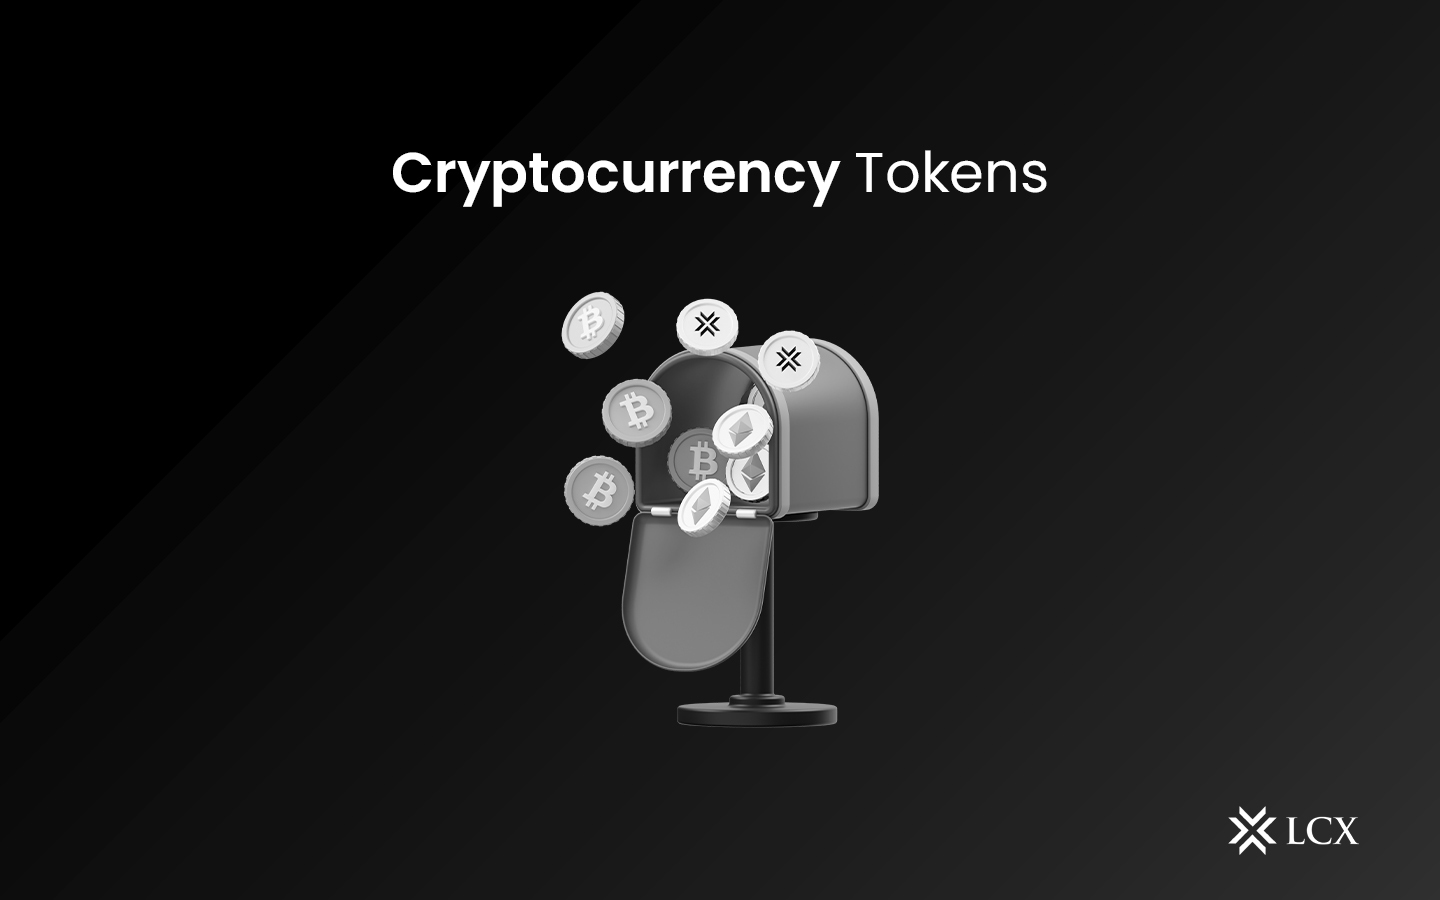 what is lcx crypto